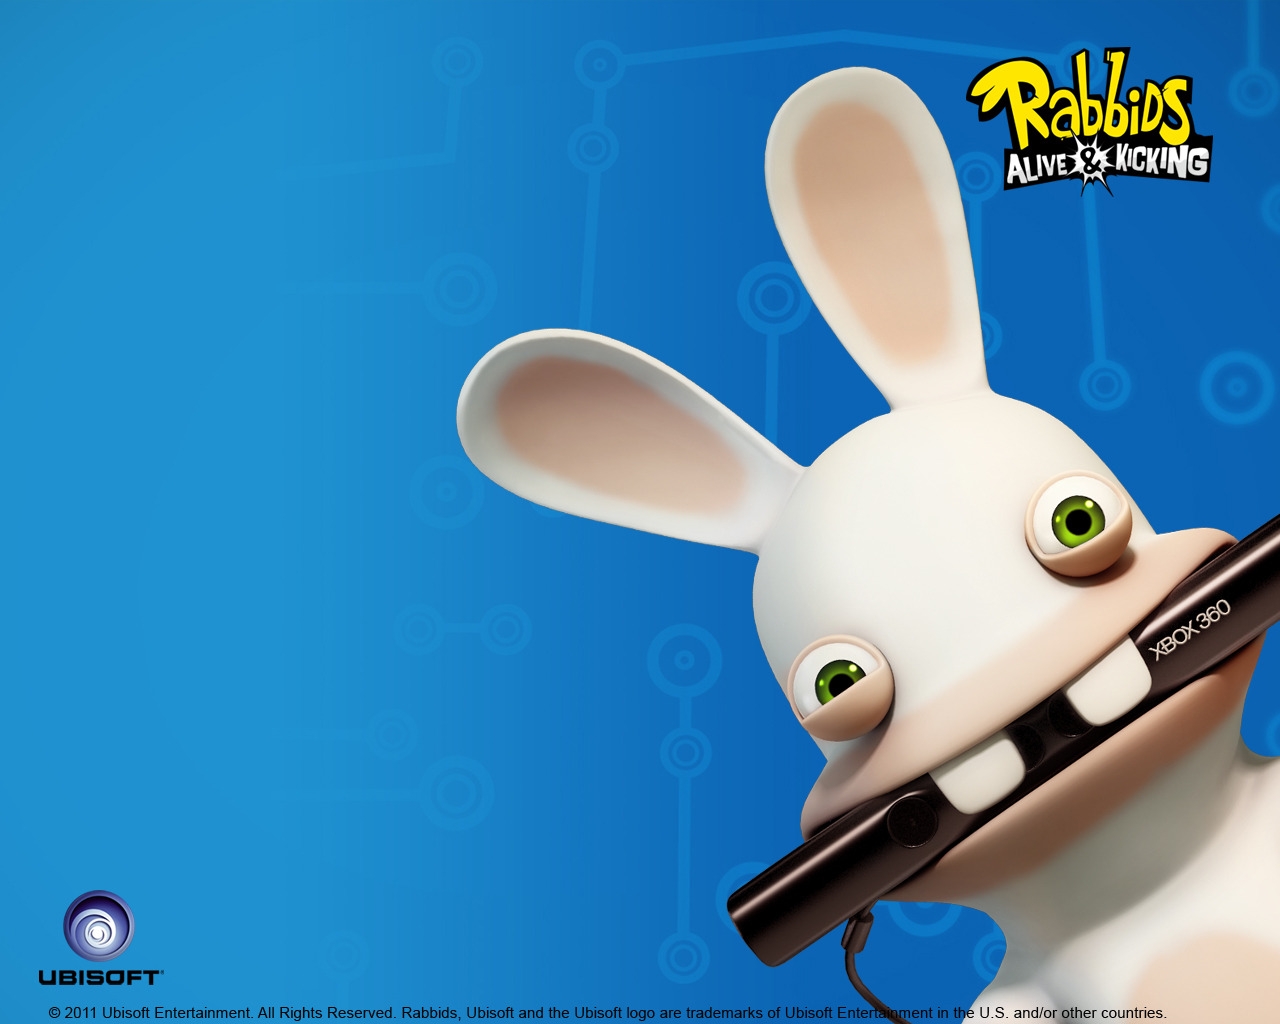 Rabbids Alive and Kicking for 1280 x 1024 resolution